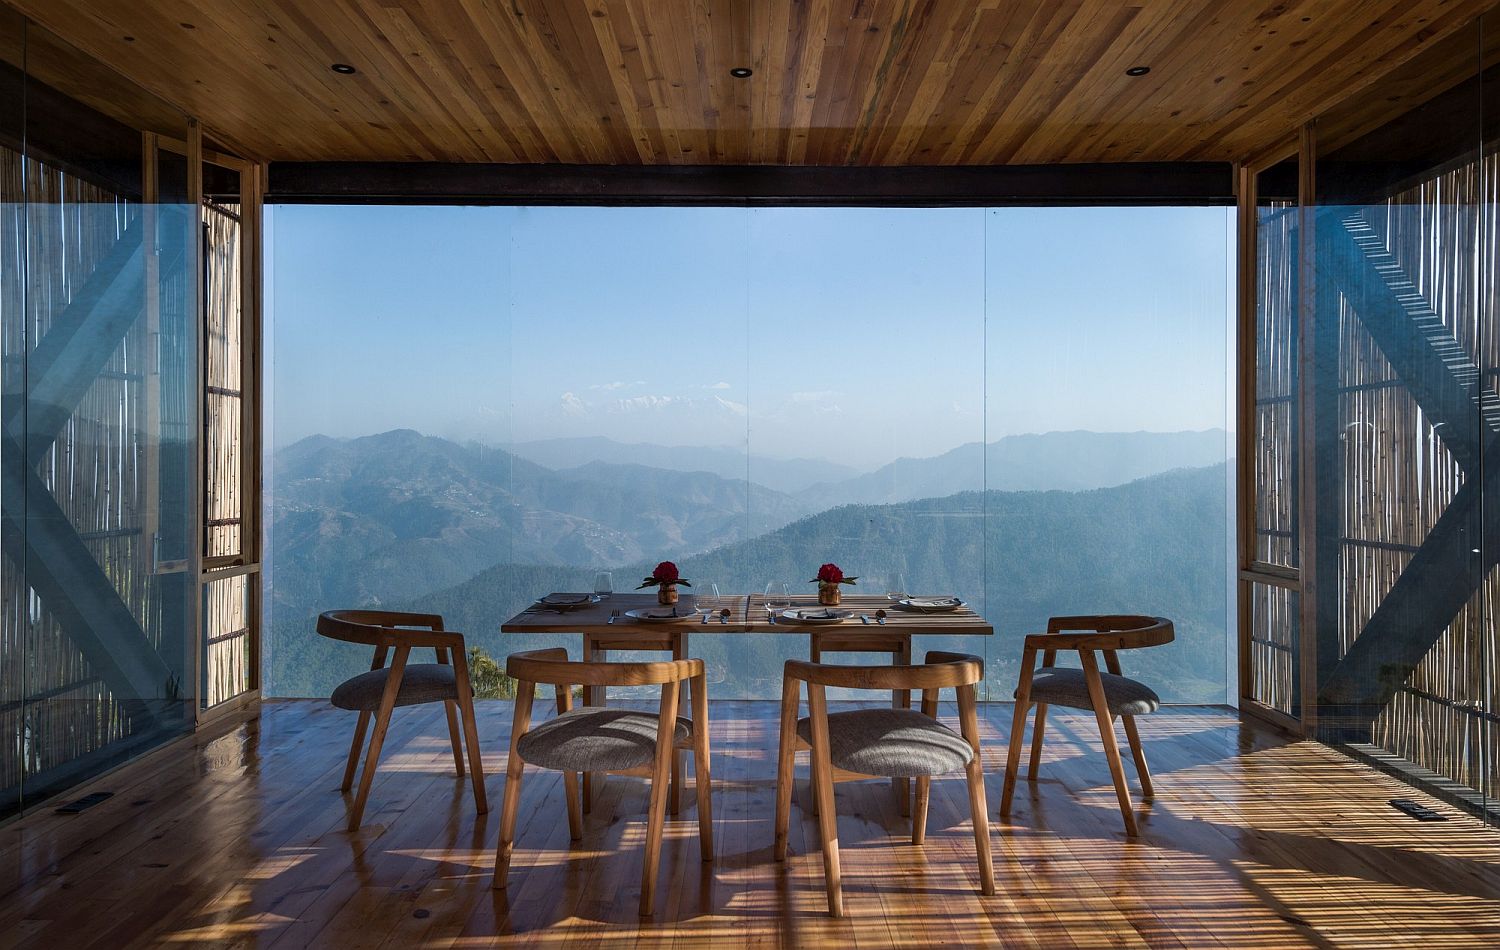 Stunning view of Kanchenjunga from the dining room of the Uttarakhand hotel